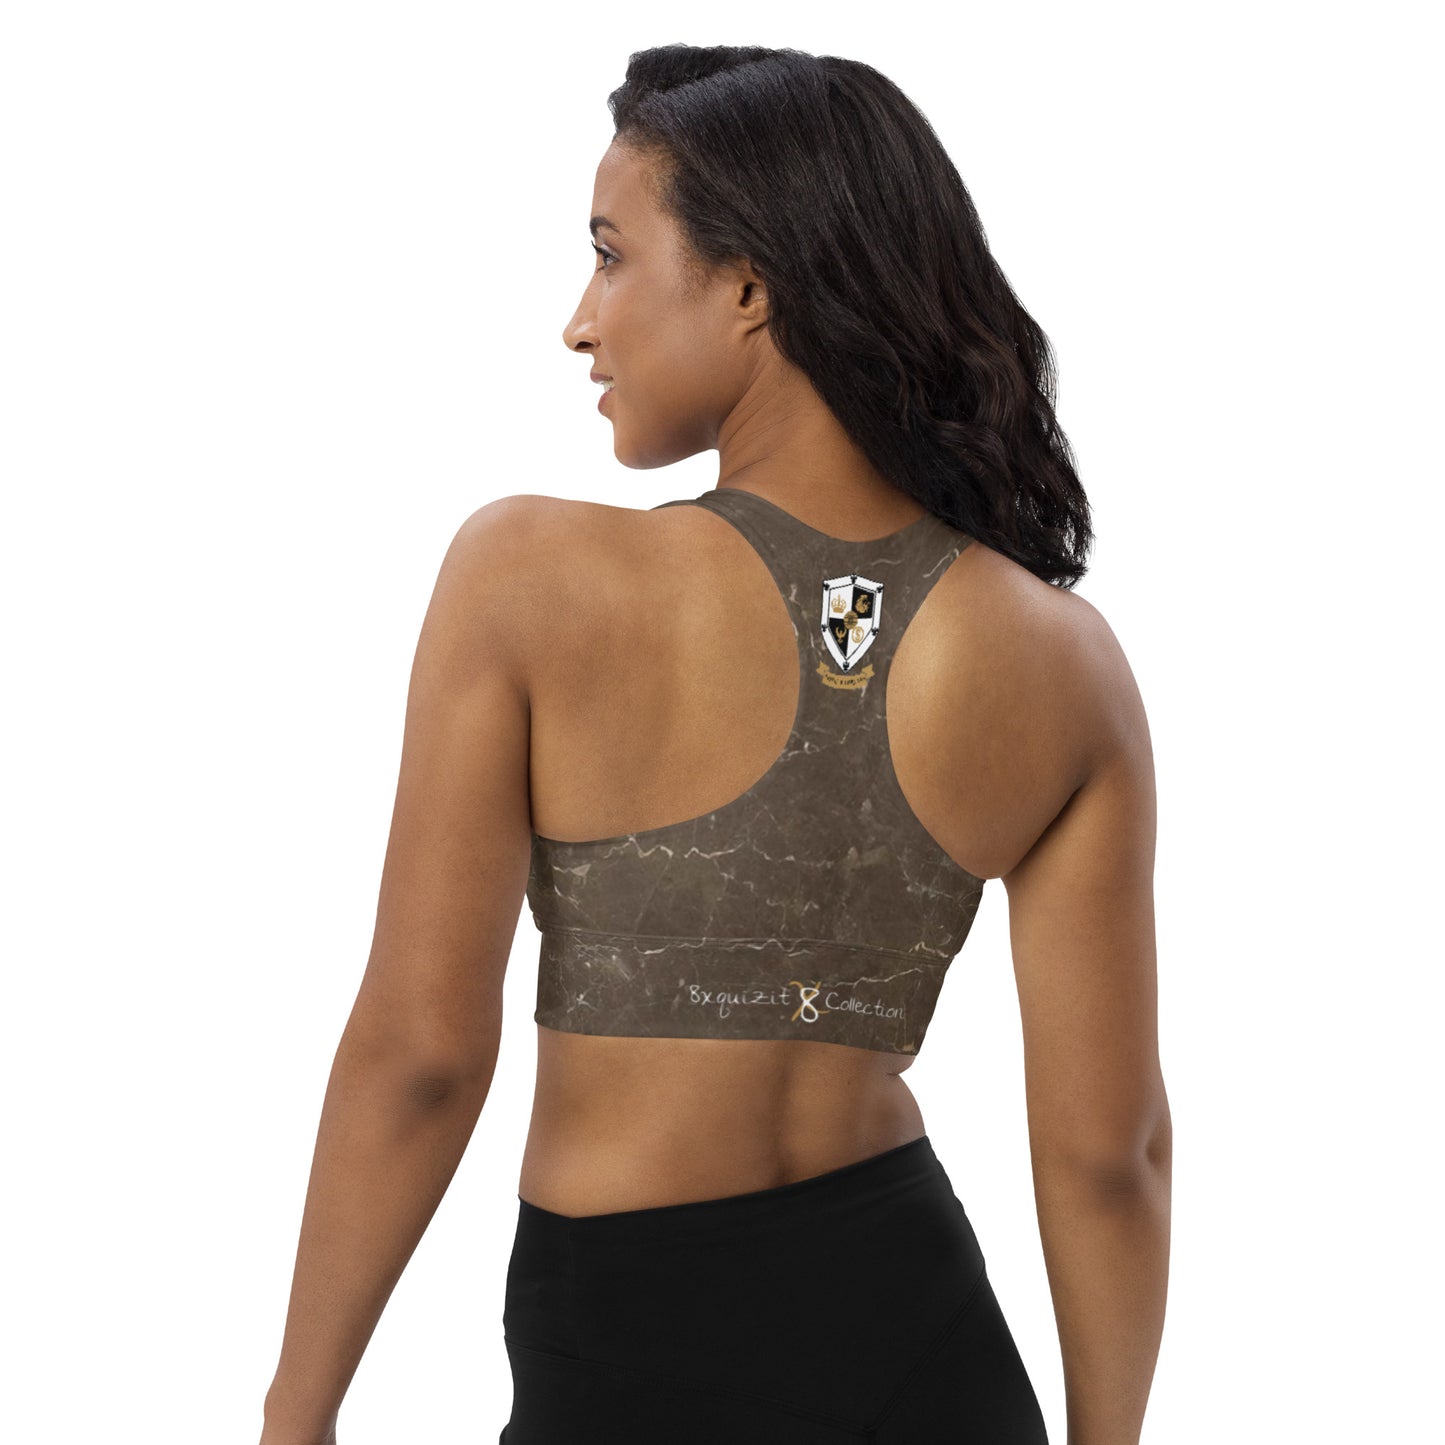 8xquiZit Collection - Women's Marble Coco-cured Longline Sports Bra